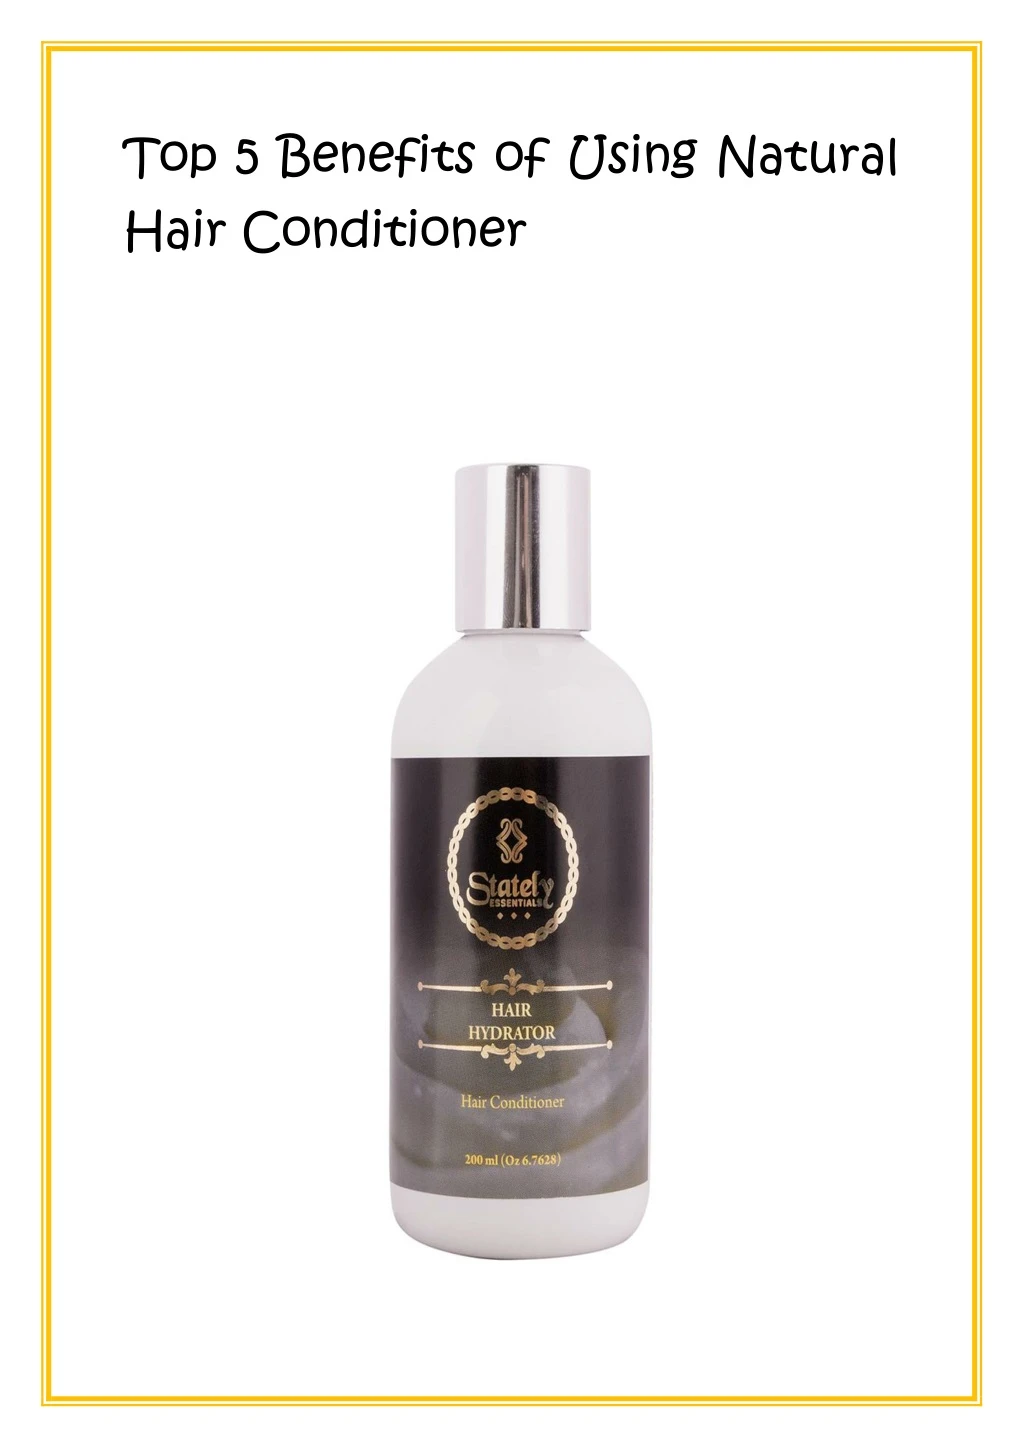 top 5 benefits of using natural hair conditioner